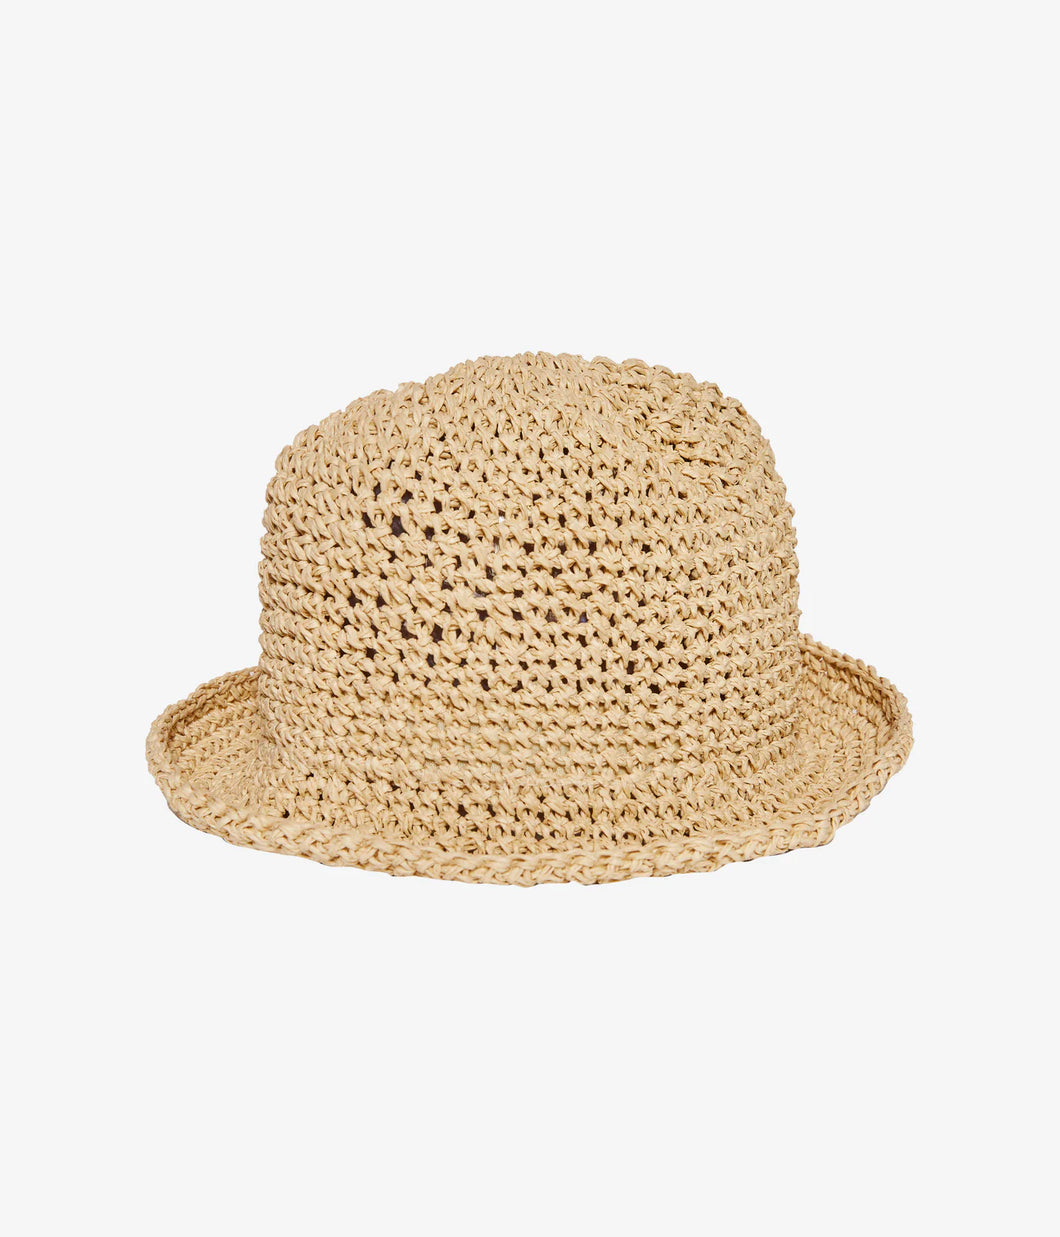 NEW! Headster Sisi Straw Hat - Pale Beige